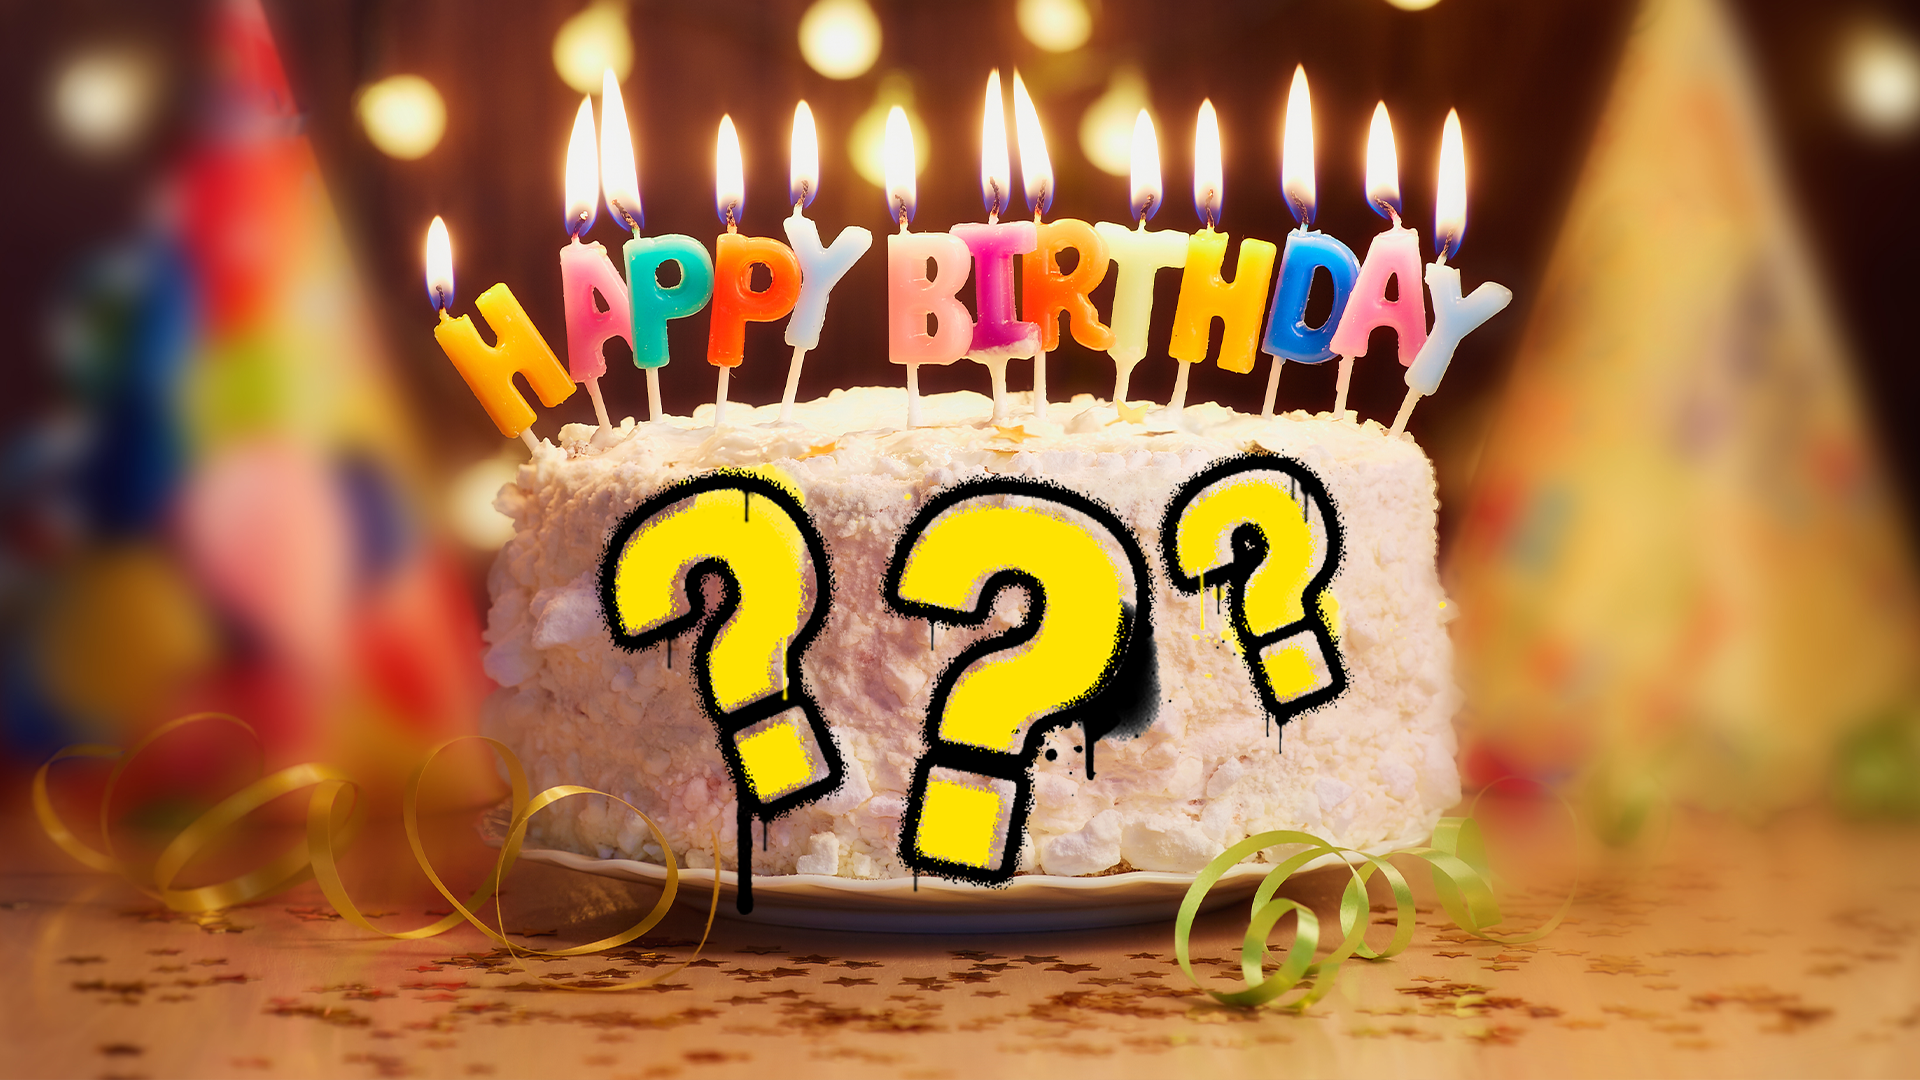 Birthday cake with question marks 